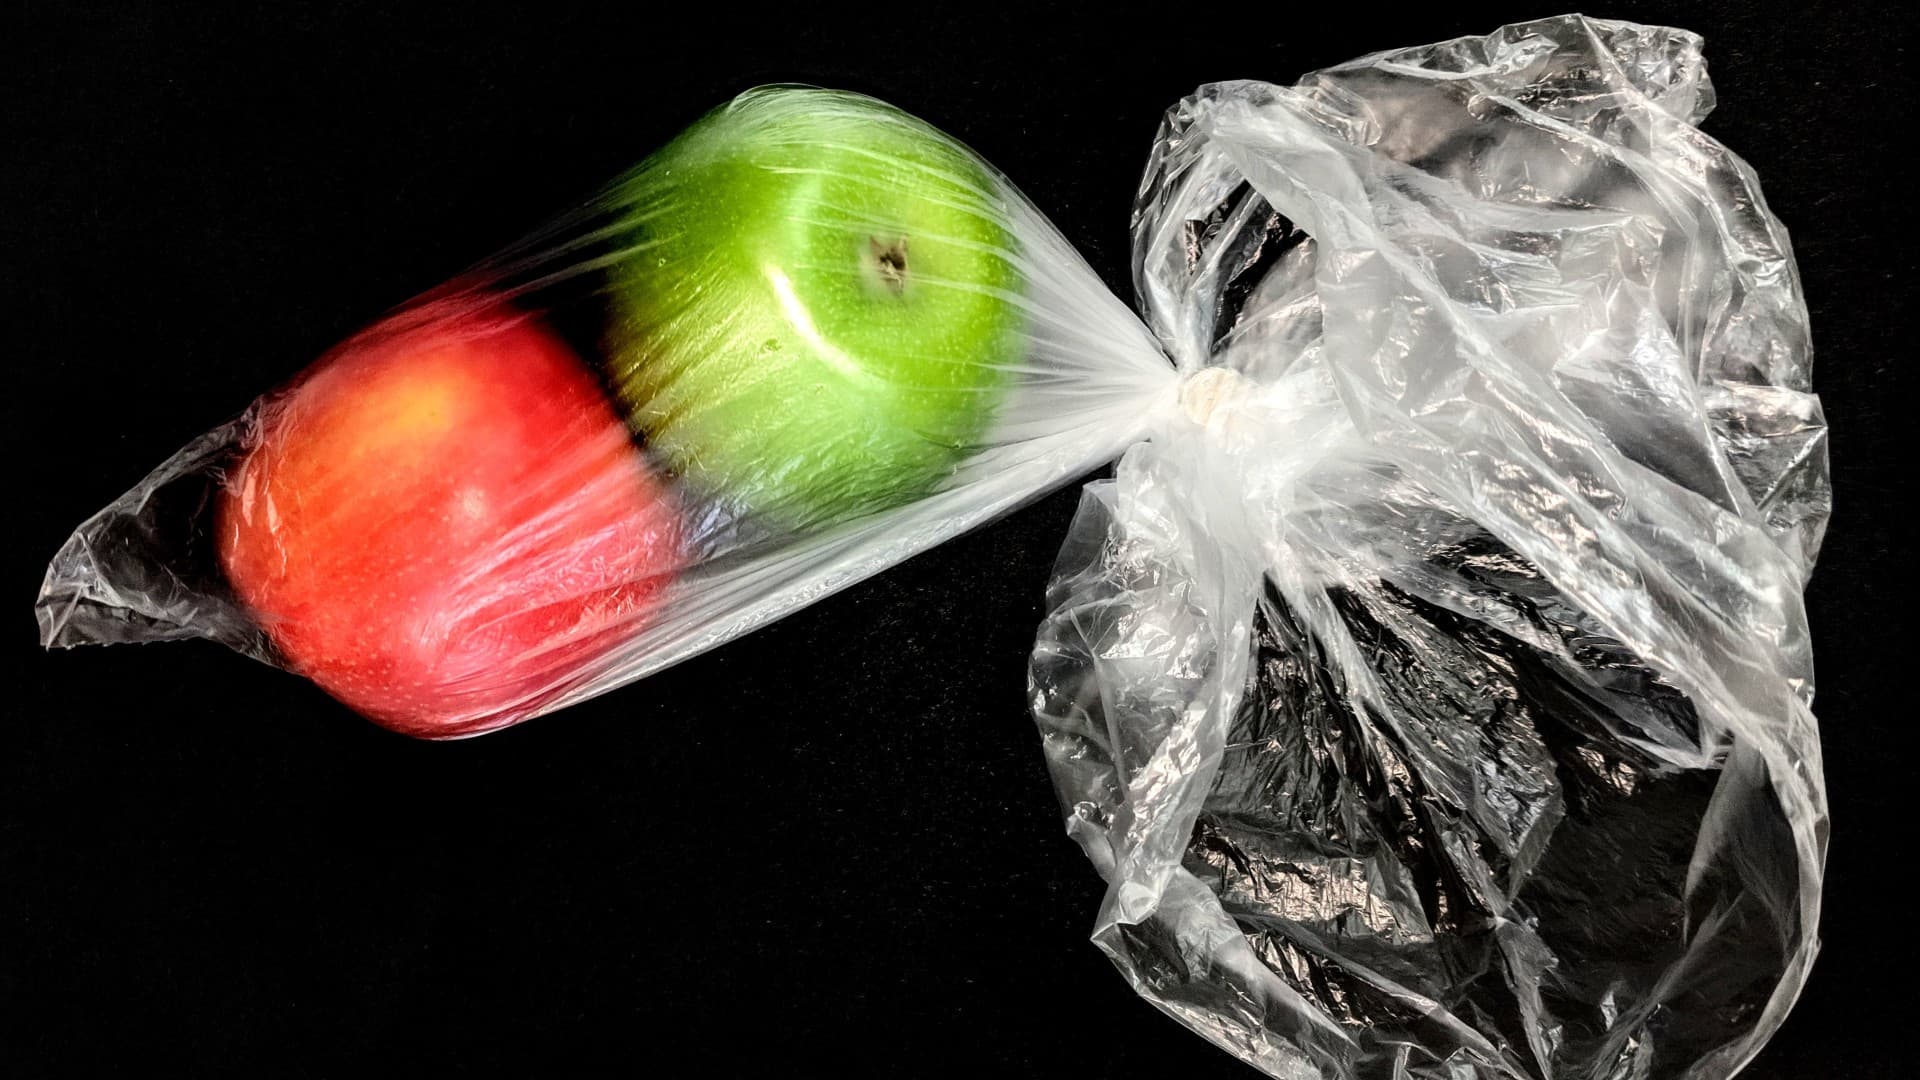 A red and green apple in a soft plastic bag. Photo: Sophie Marston/Unsplash